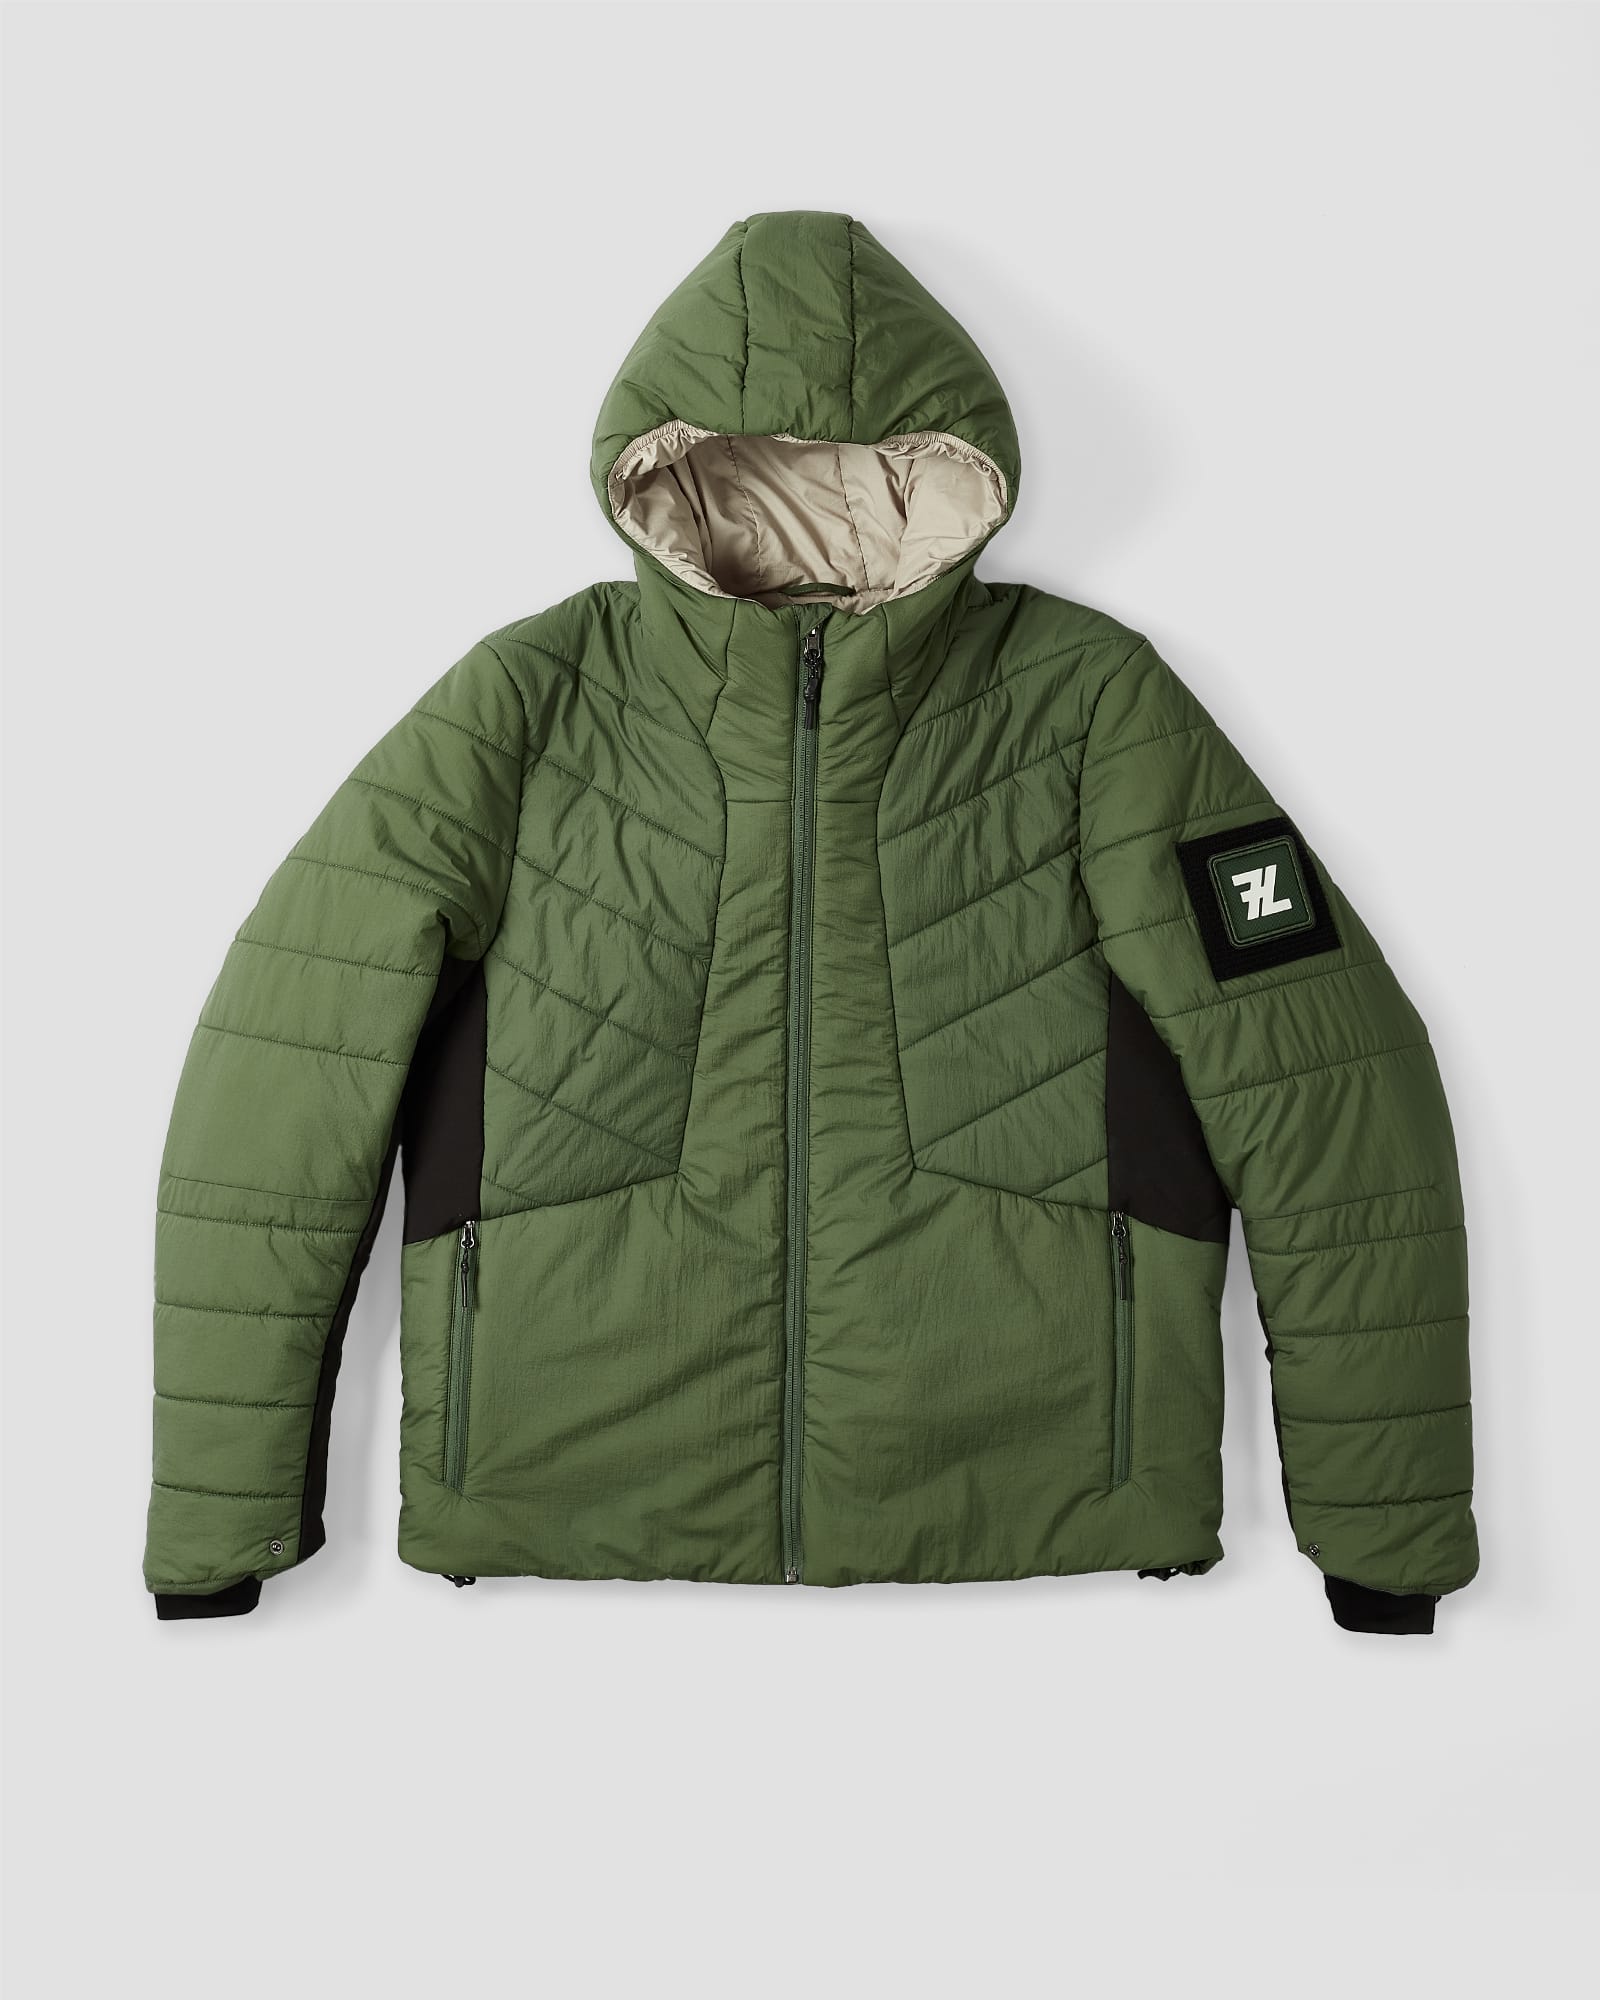 L5 - Anti Resonance Outer (Green)